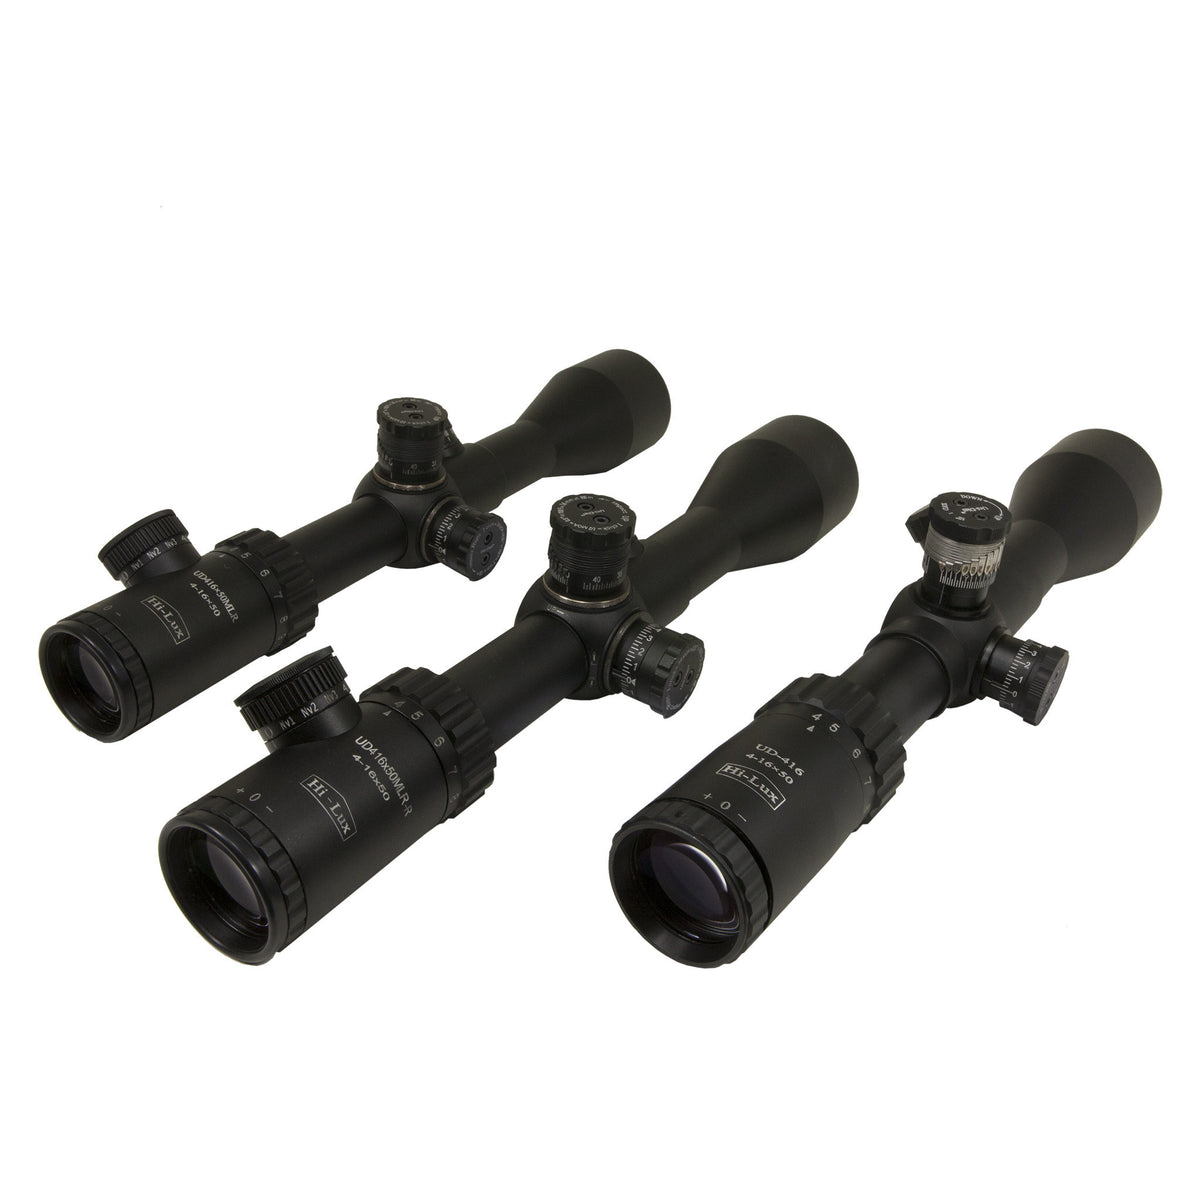 Collection of Uni-Dial Ballistic Rifle Scopes